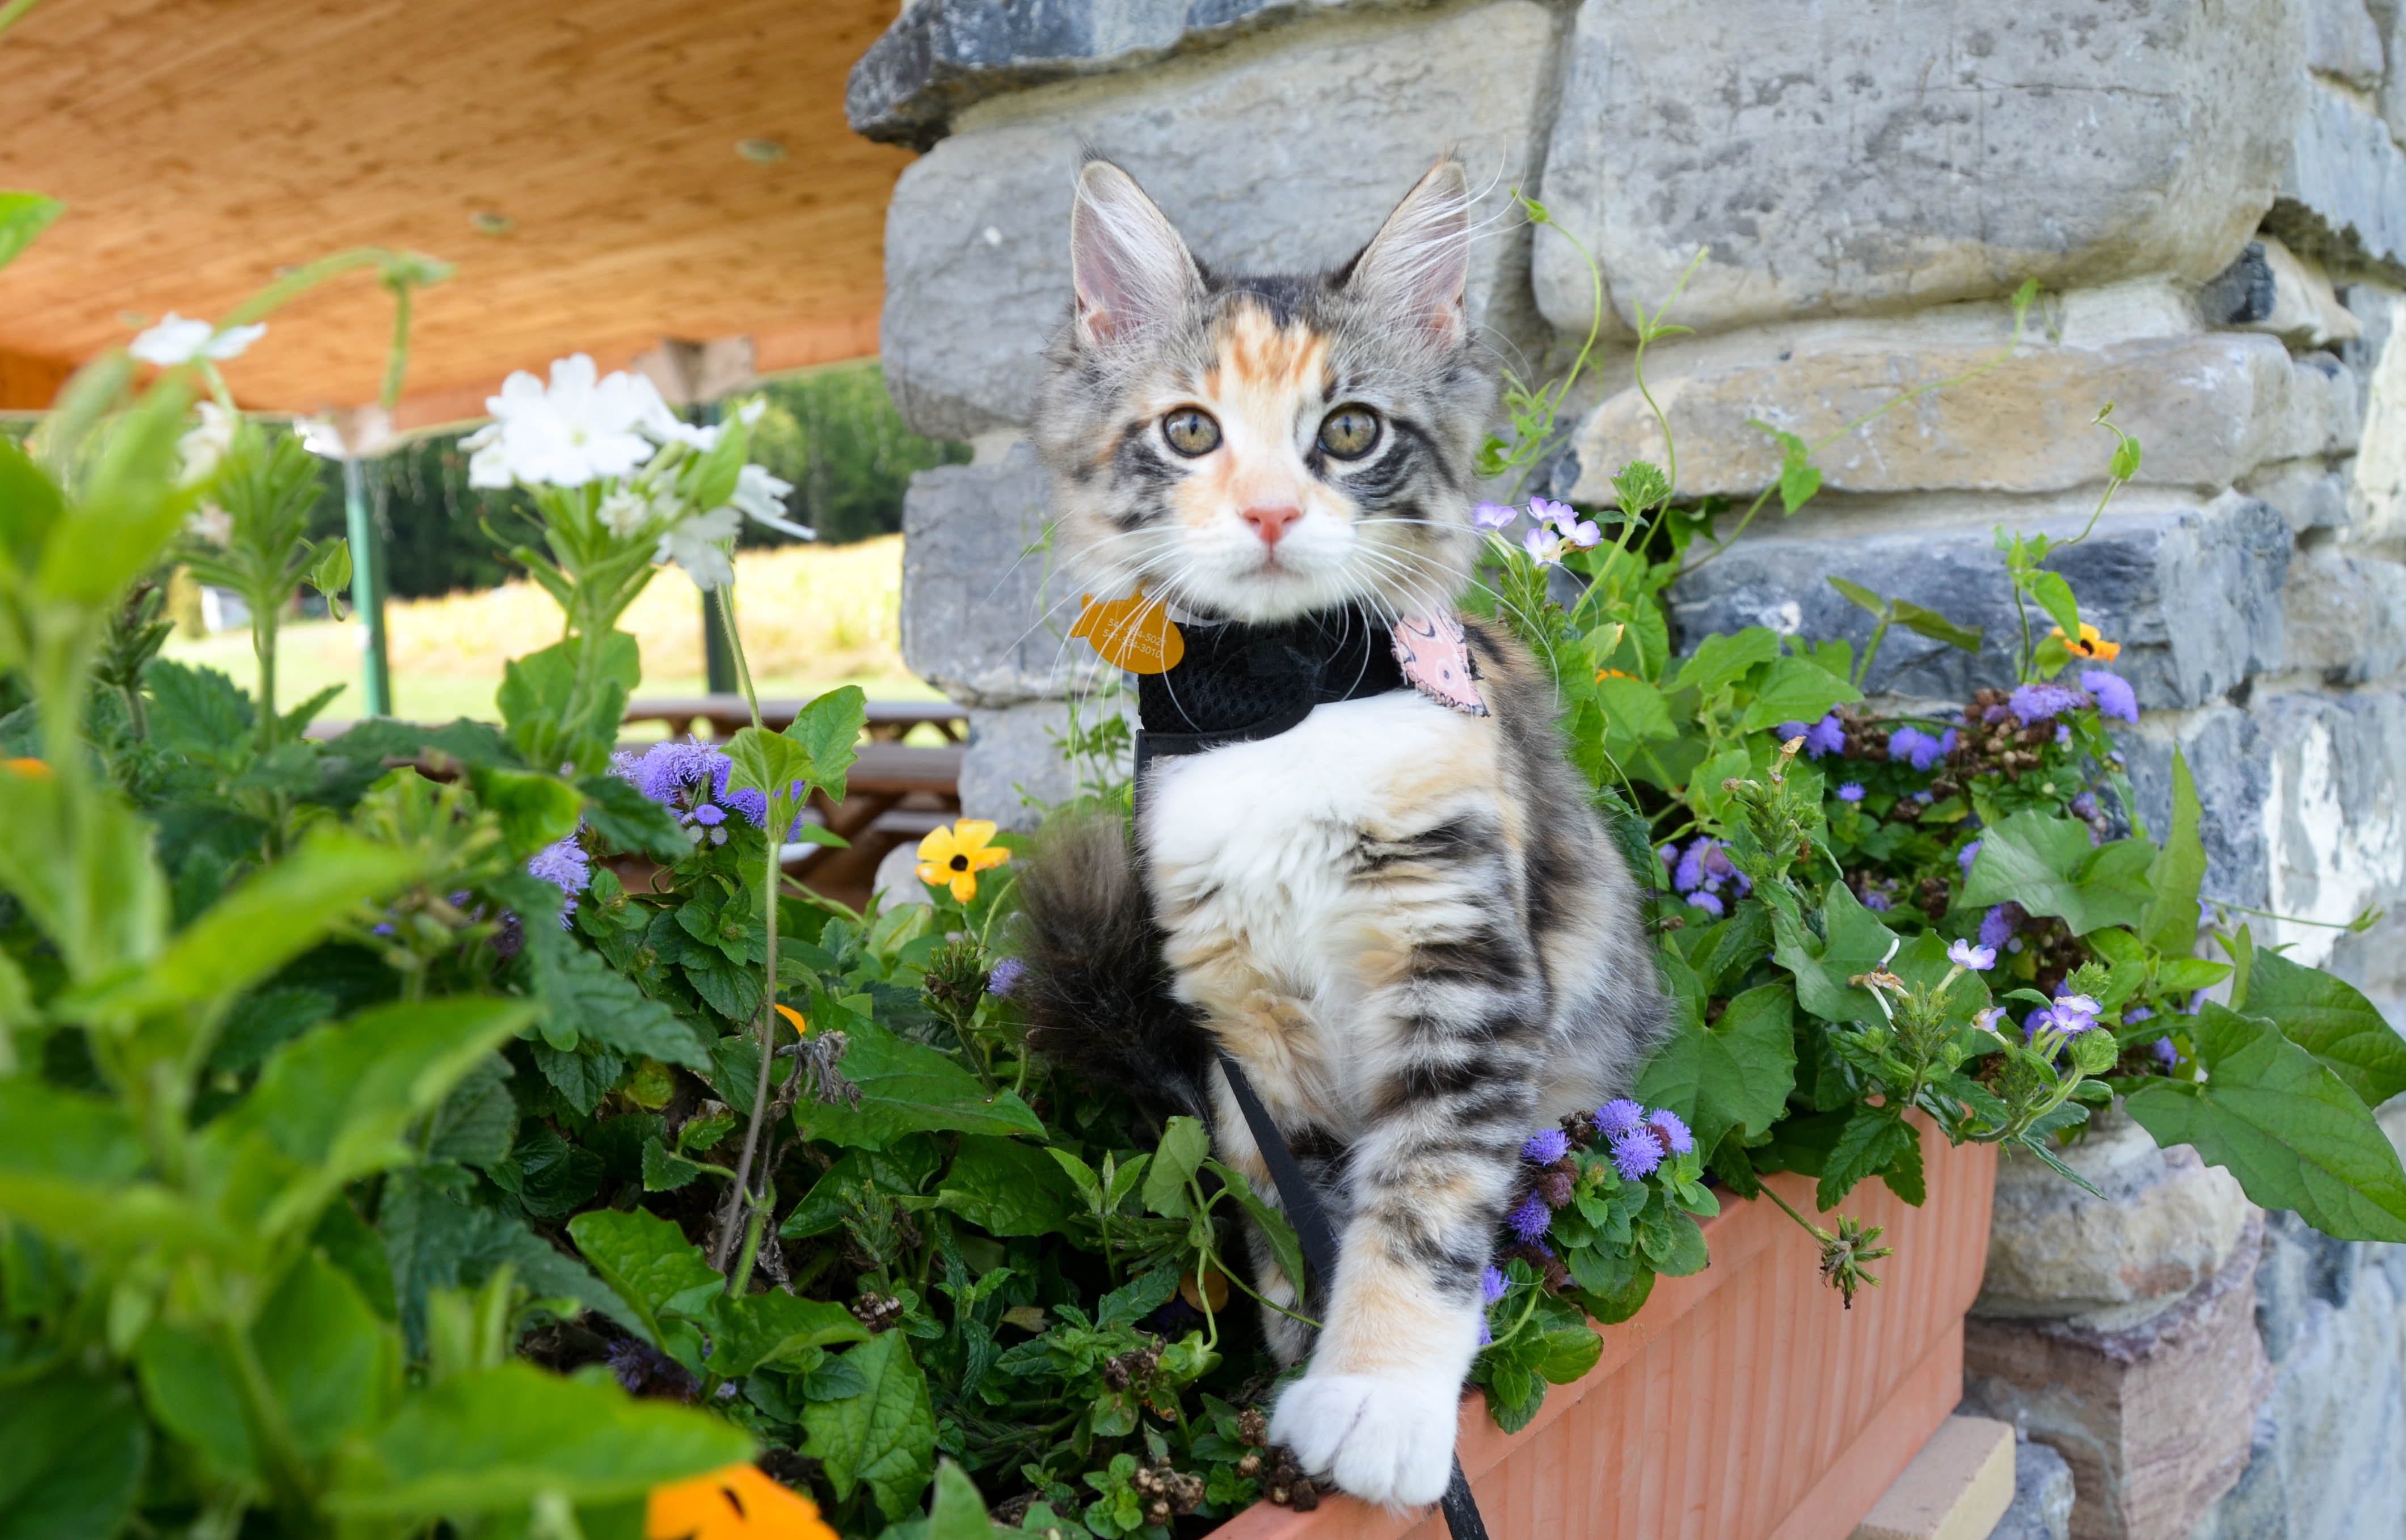 Gypsy in the flowers.